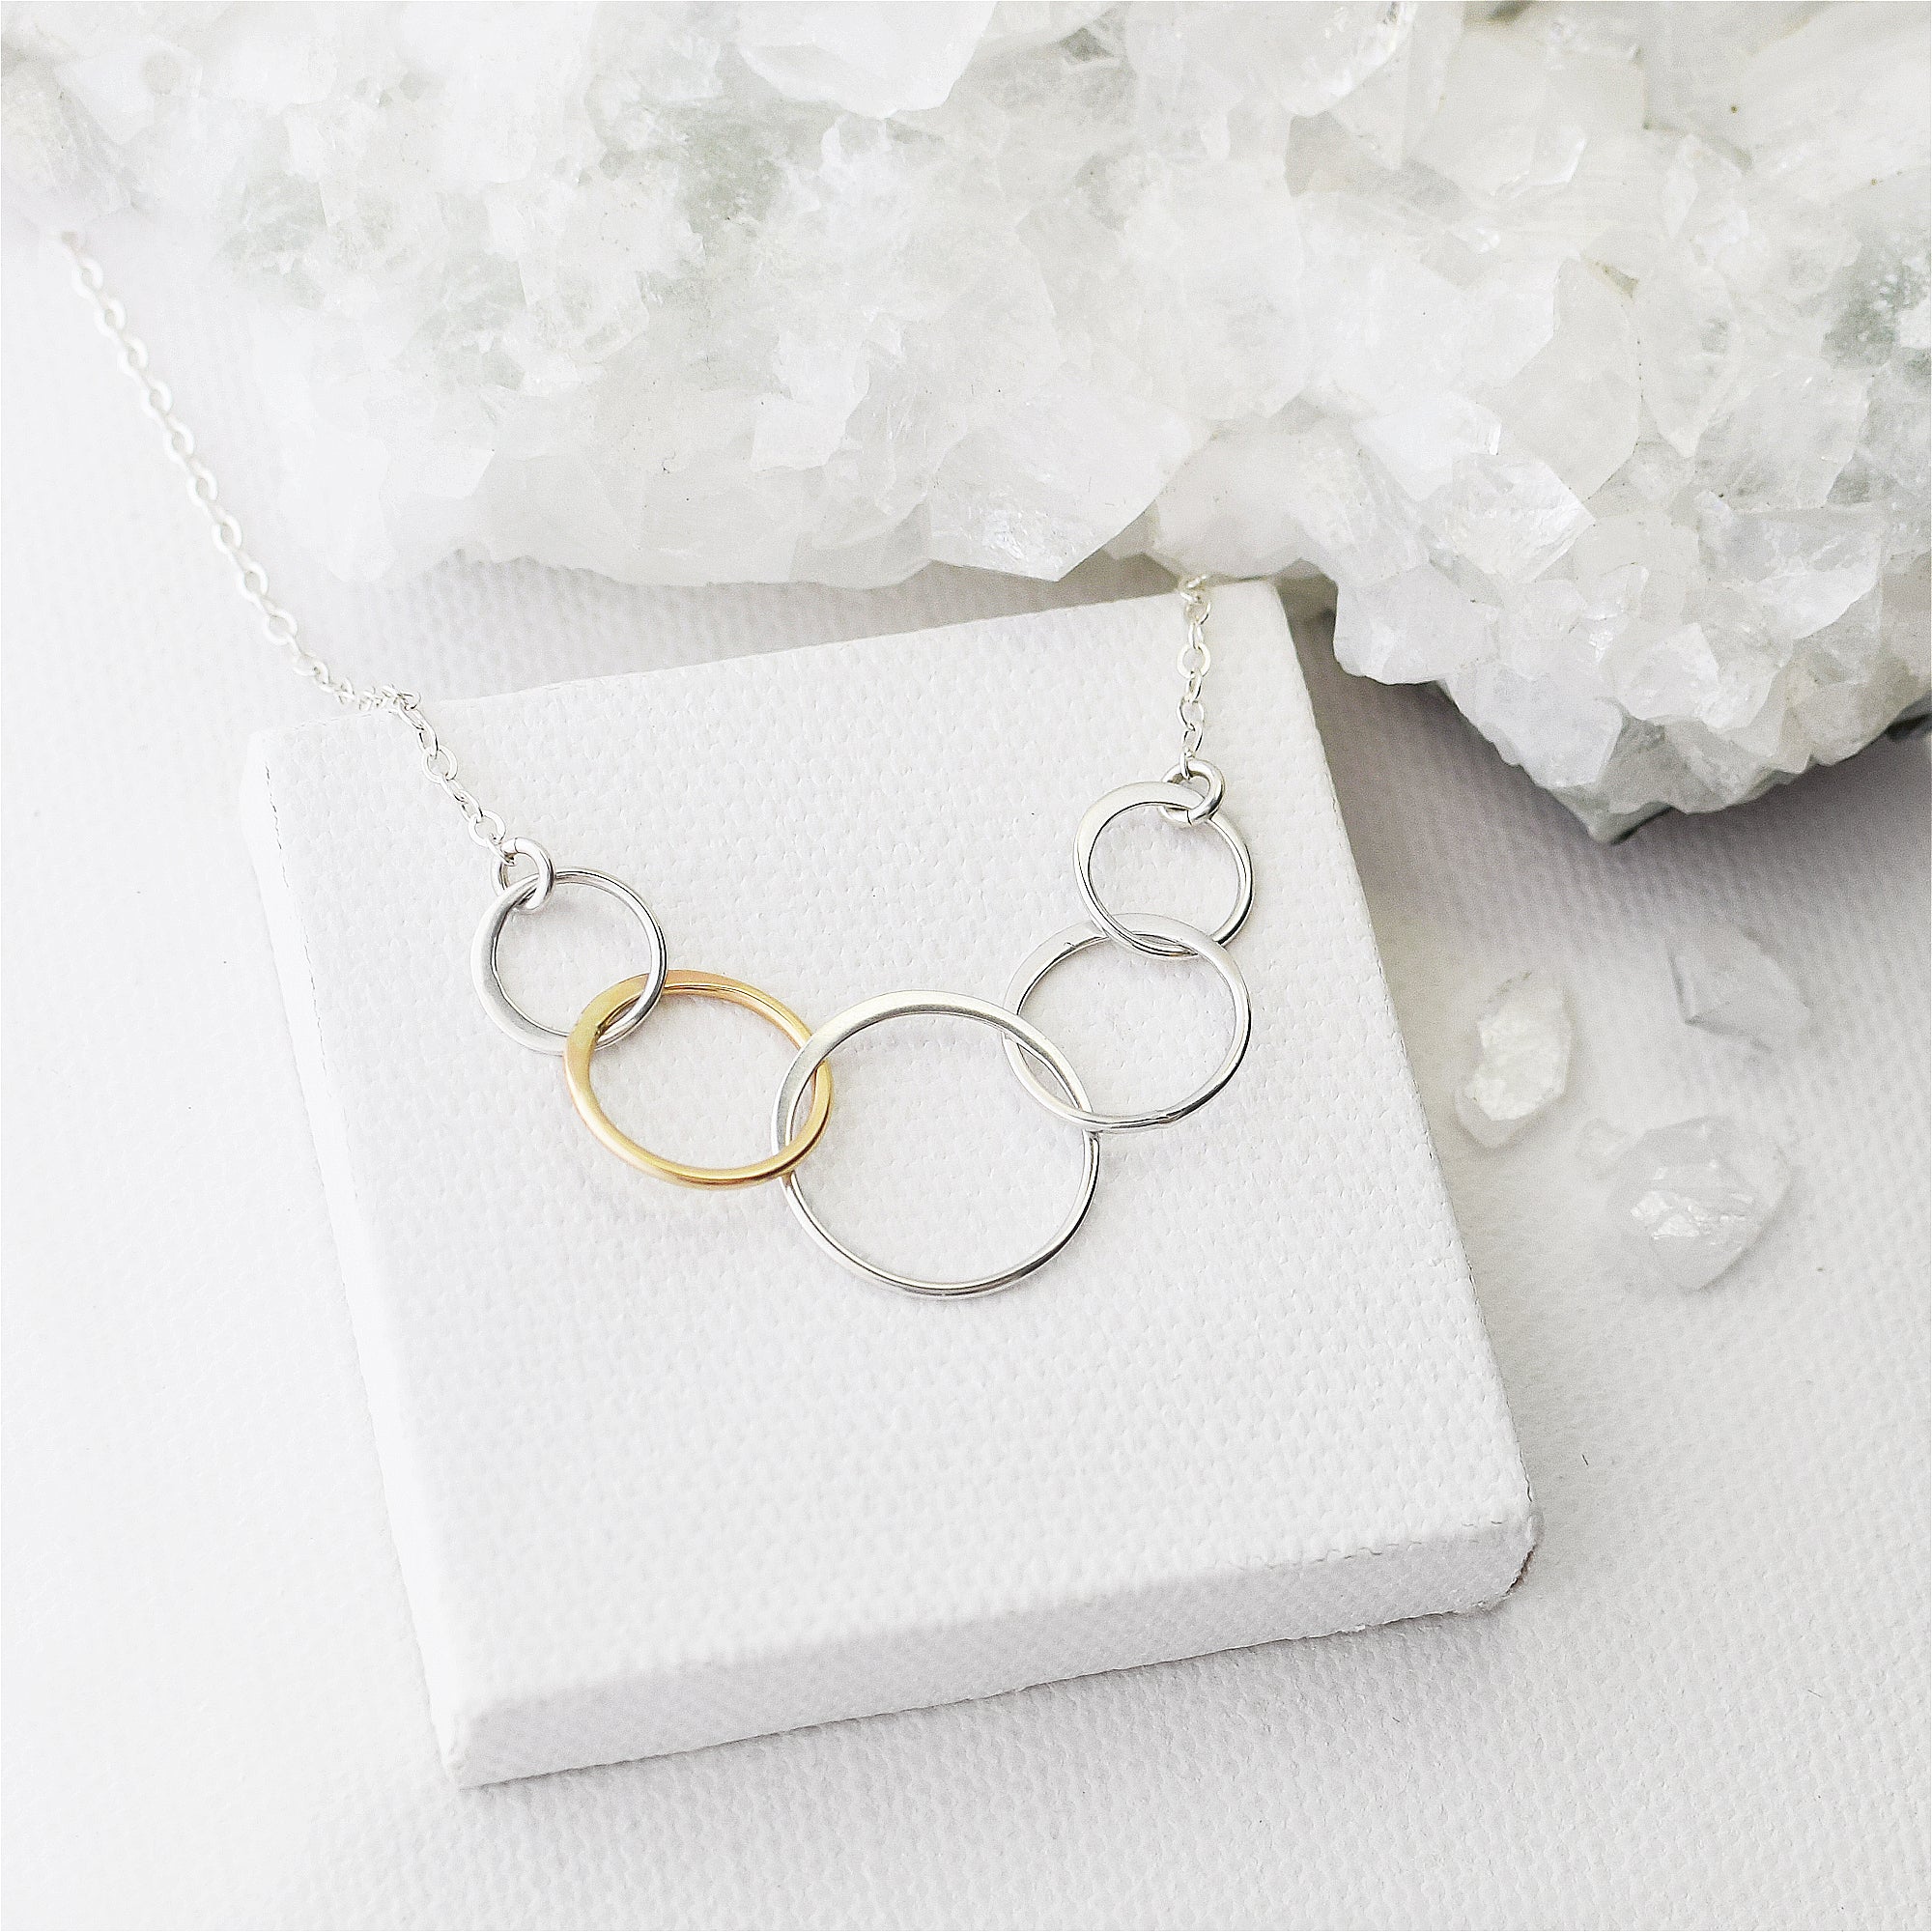 Circles Necklace, Two Circles Necklace, Circles Pendant, Infinity Necklace,  Couple Necklace, Sterling Silver Necklace, Minimalist Necklace - Etsy